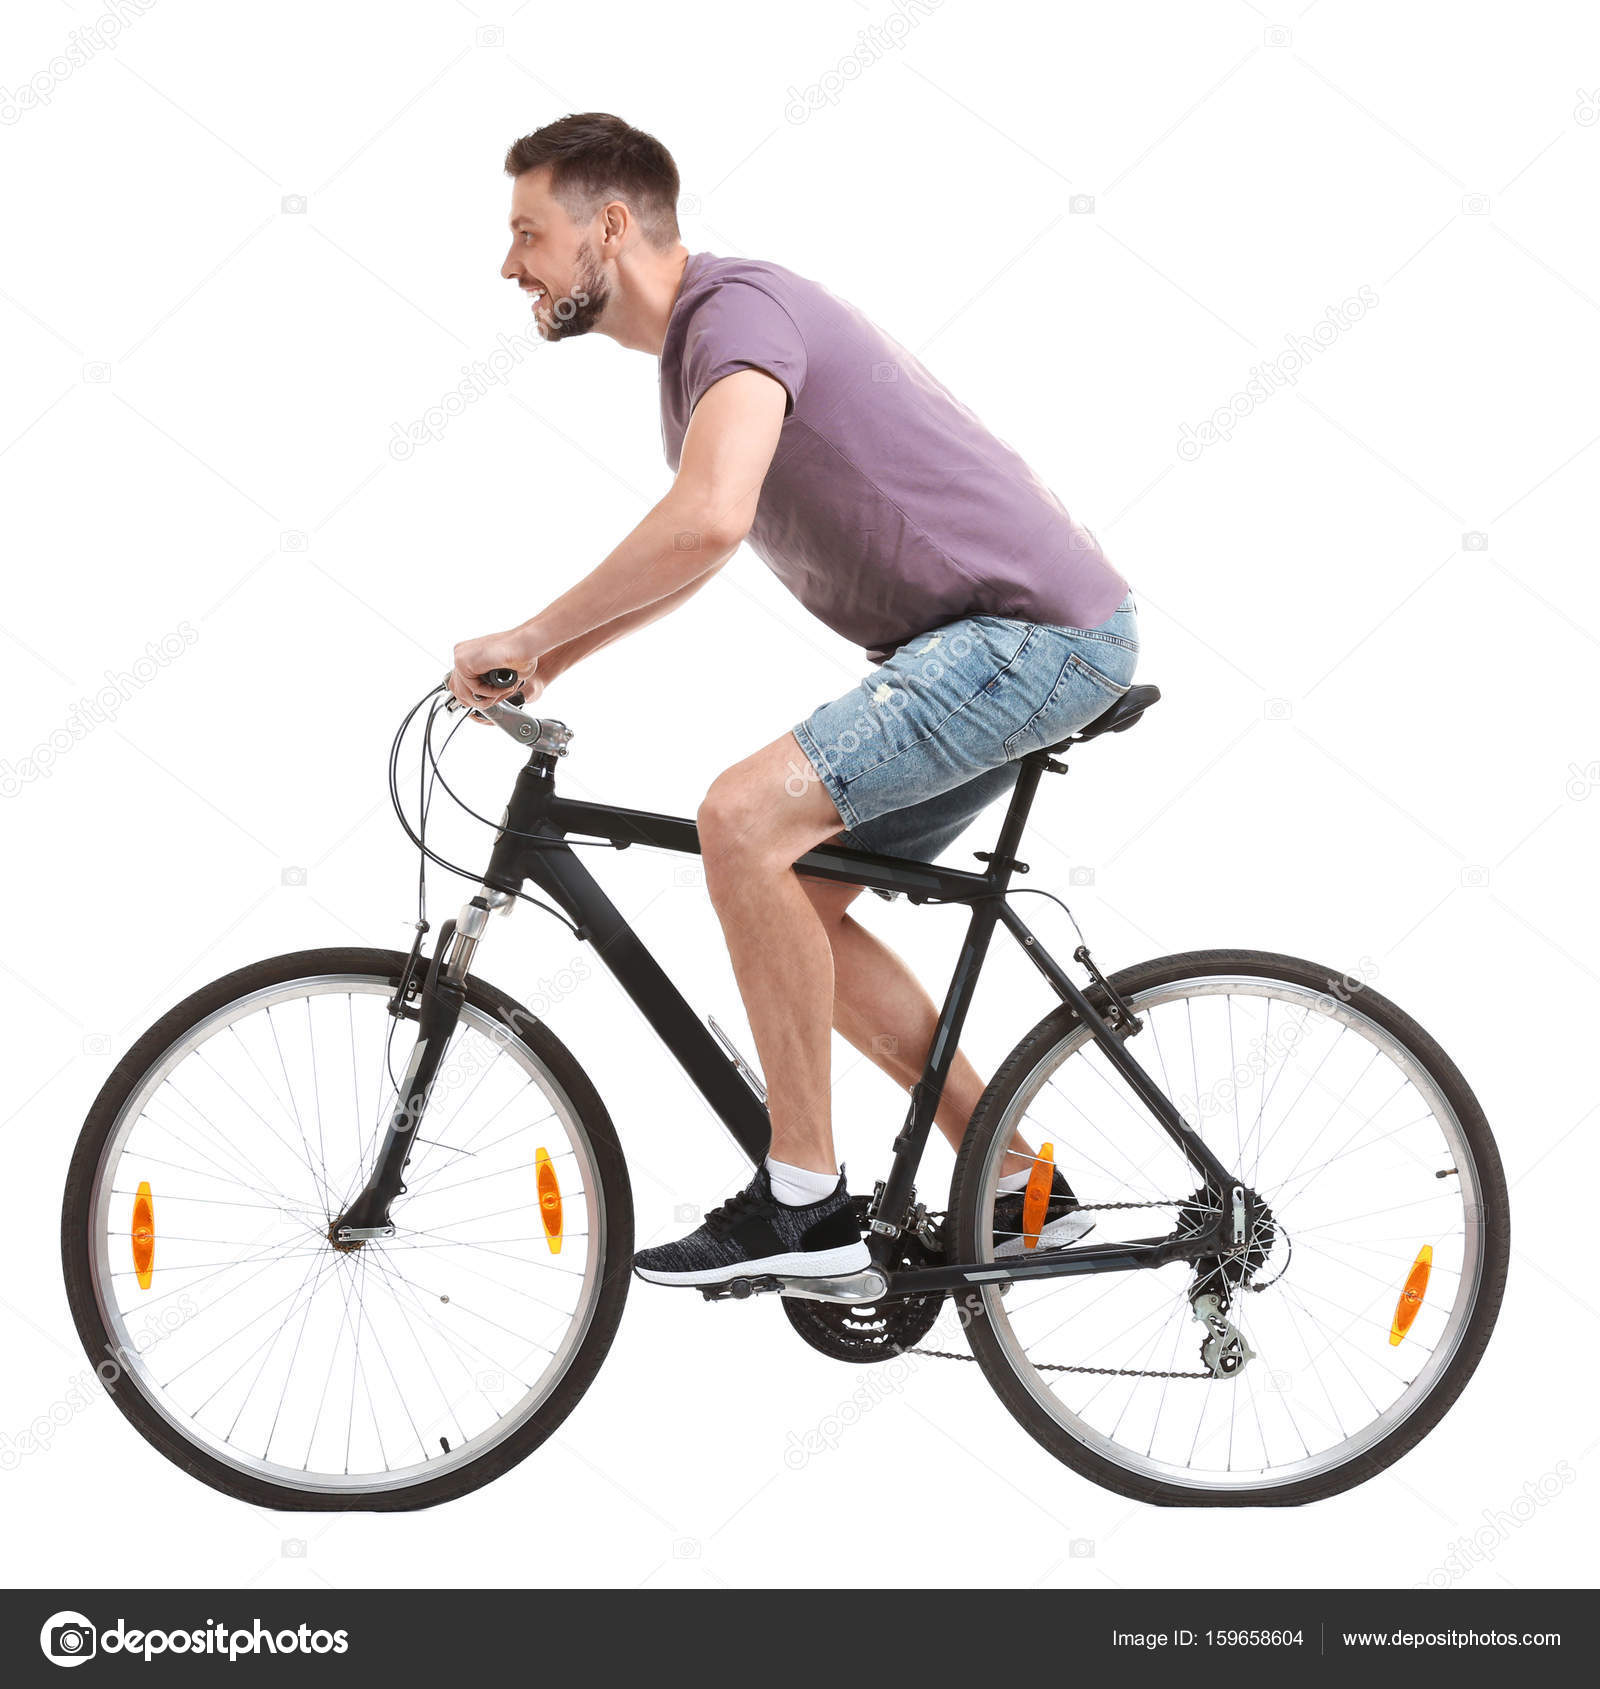 Man With Cycle - Depositphotos 159658604 Stock Photo HanDsome Young Man RiDing Bicycle